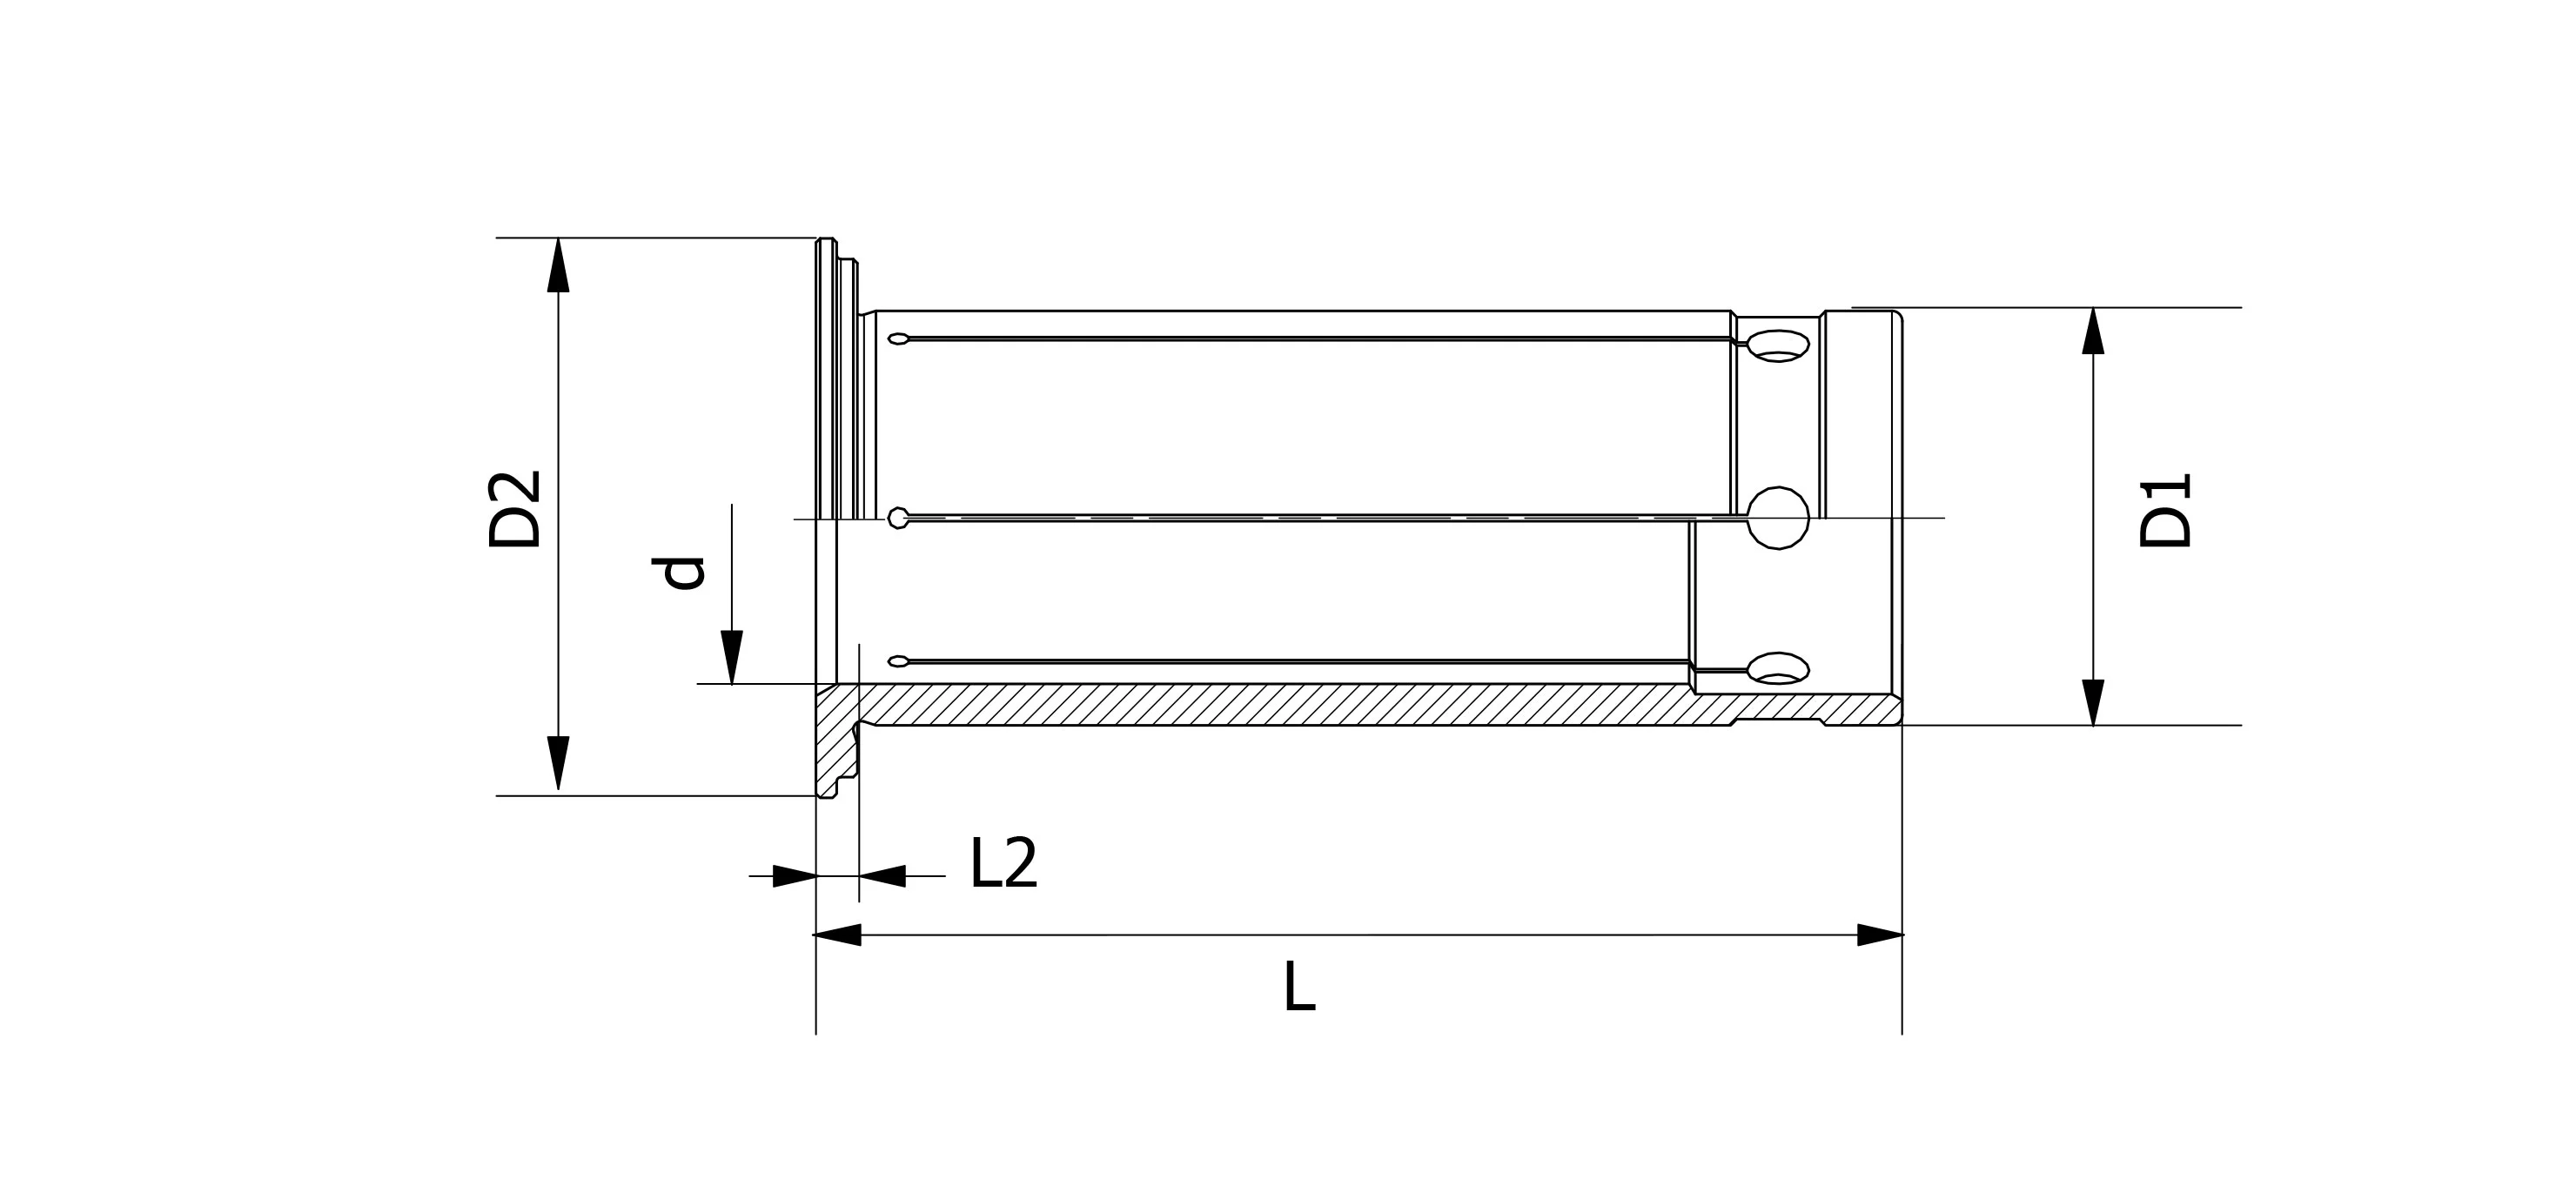 SPECIFICATION OF HYDRAULIC COLLET STANDARD